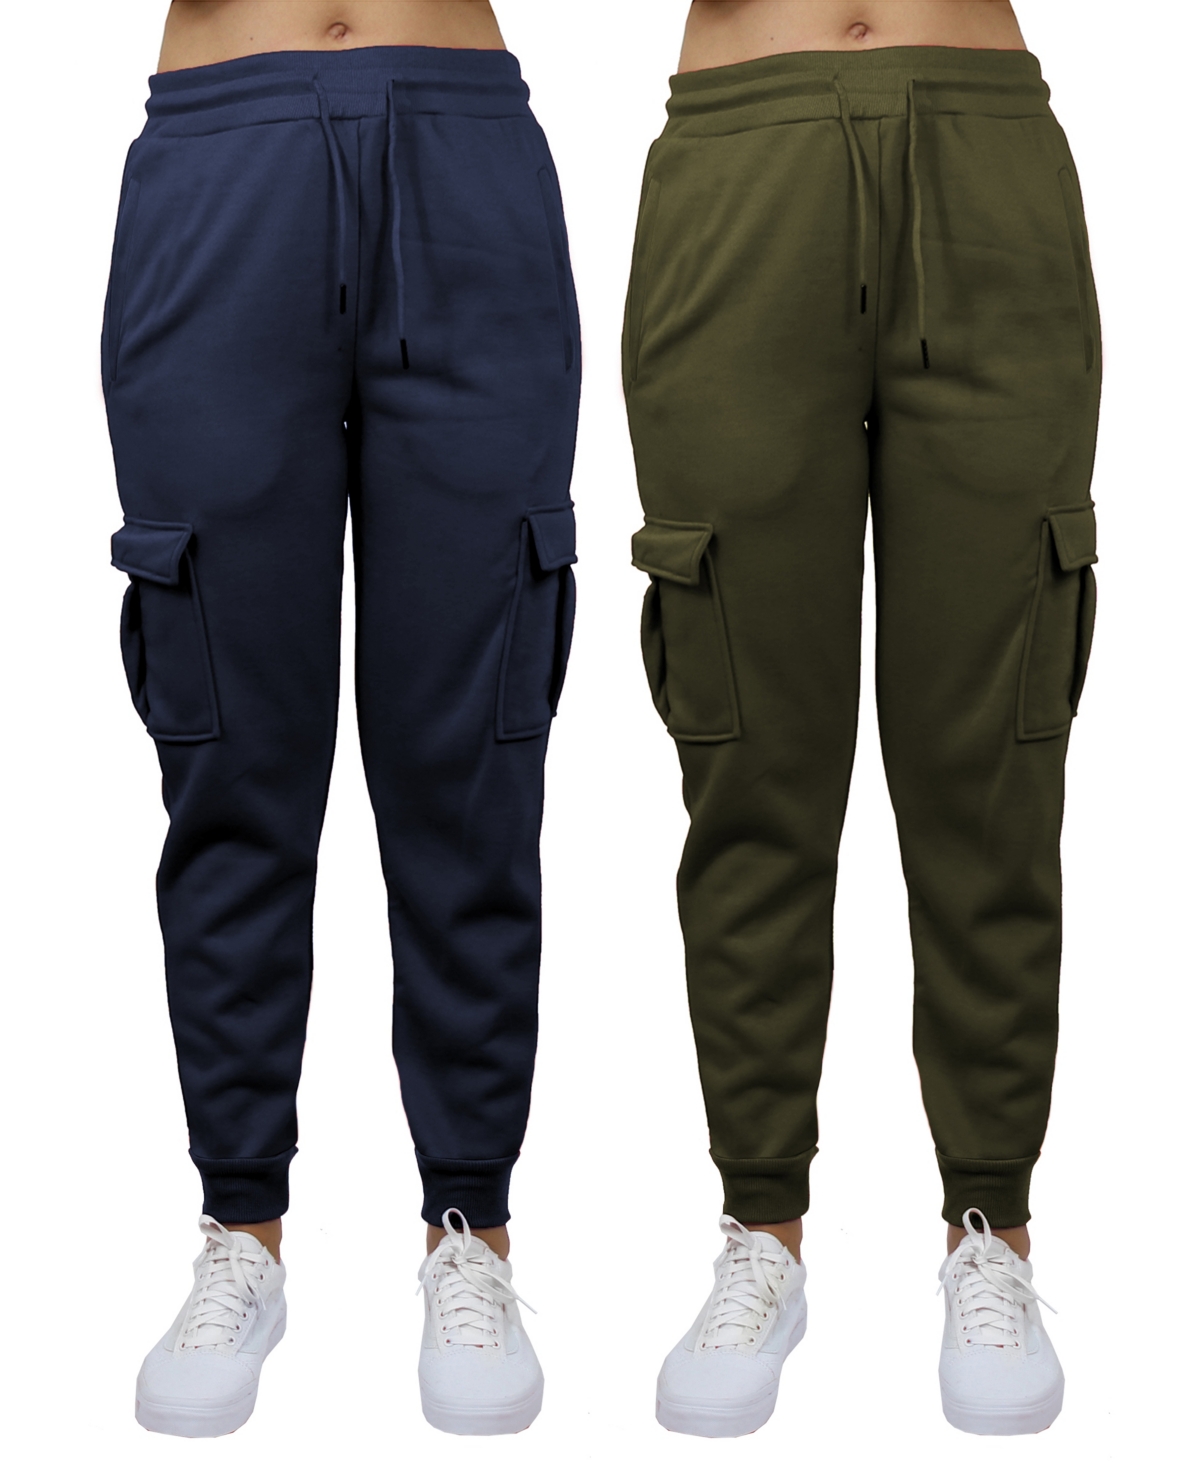 Galaxy By Harvic Women's Heavyweight Loose Fit Fleece Lined Cargo Jogger Pants Set, 2 Pack In Navy,olive